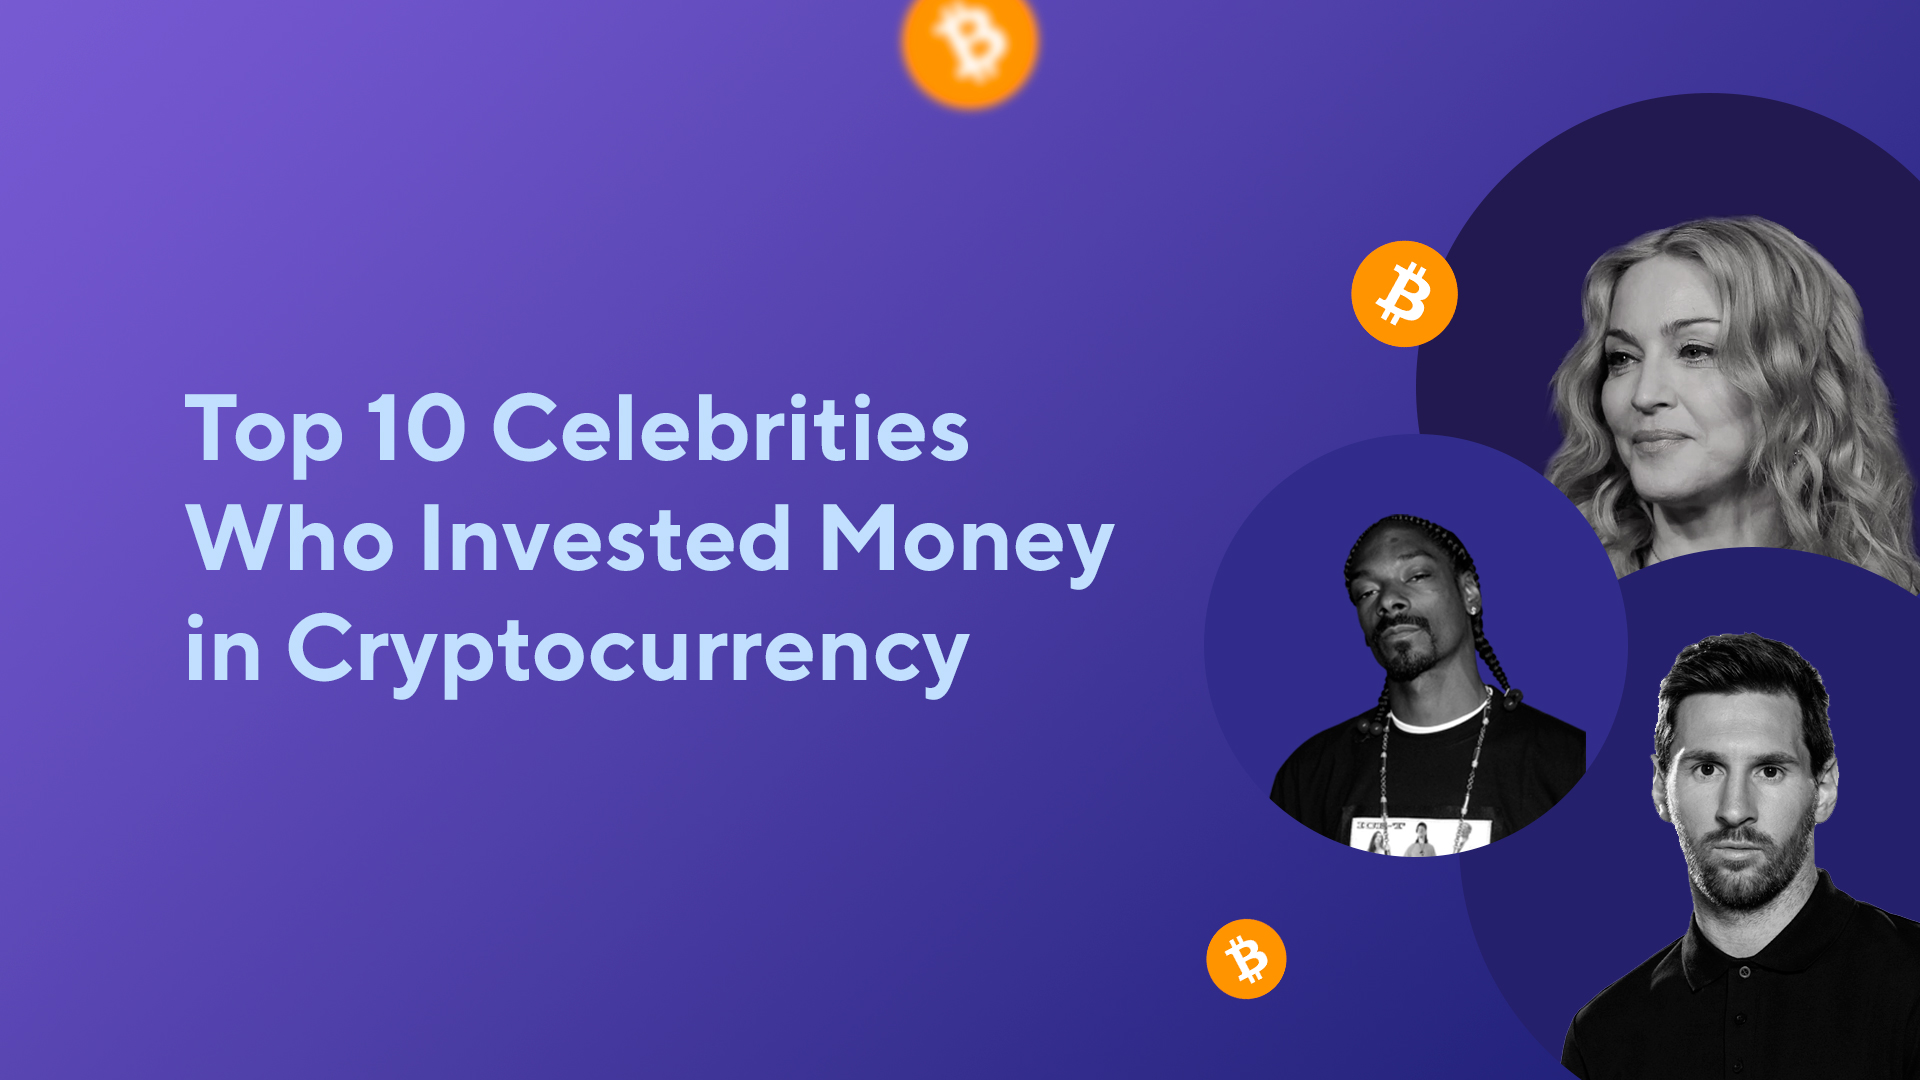 Top 10 Celebrities Who Invested Money in Cryptocurrency